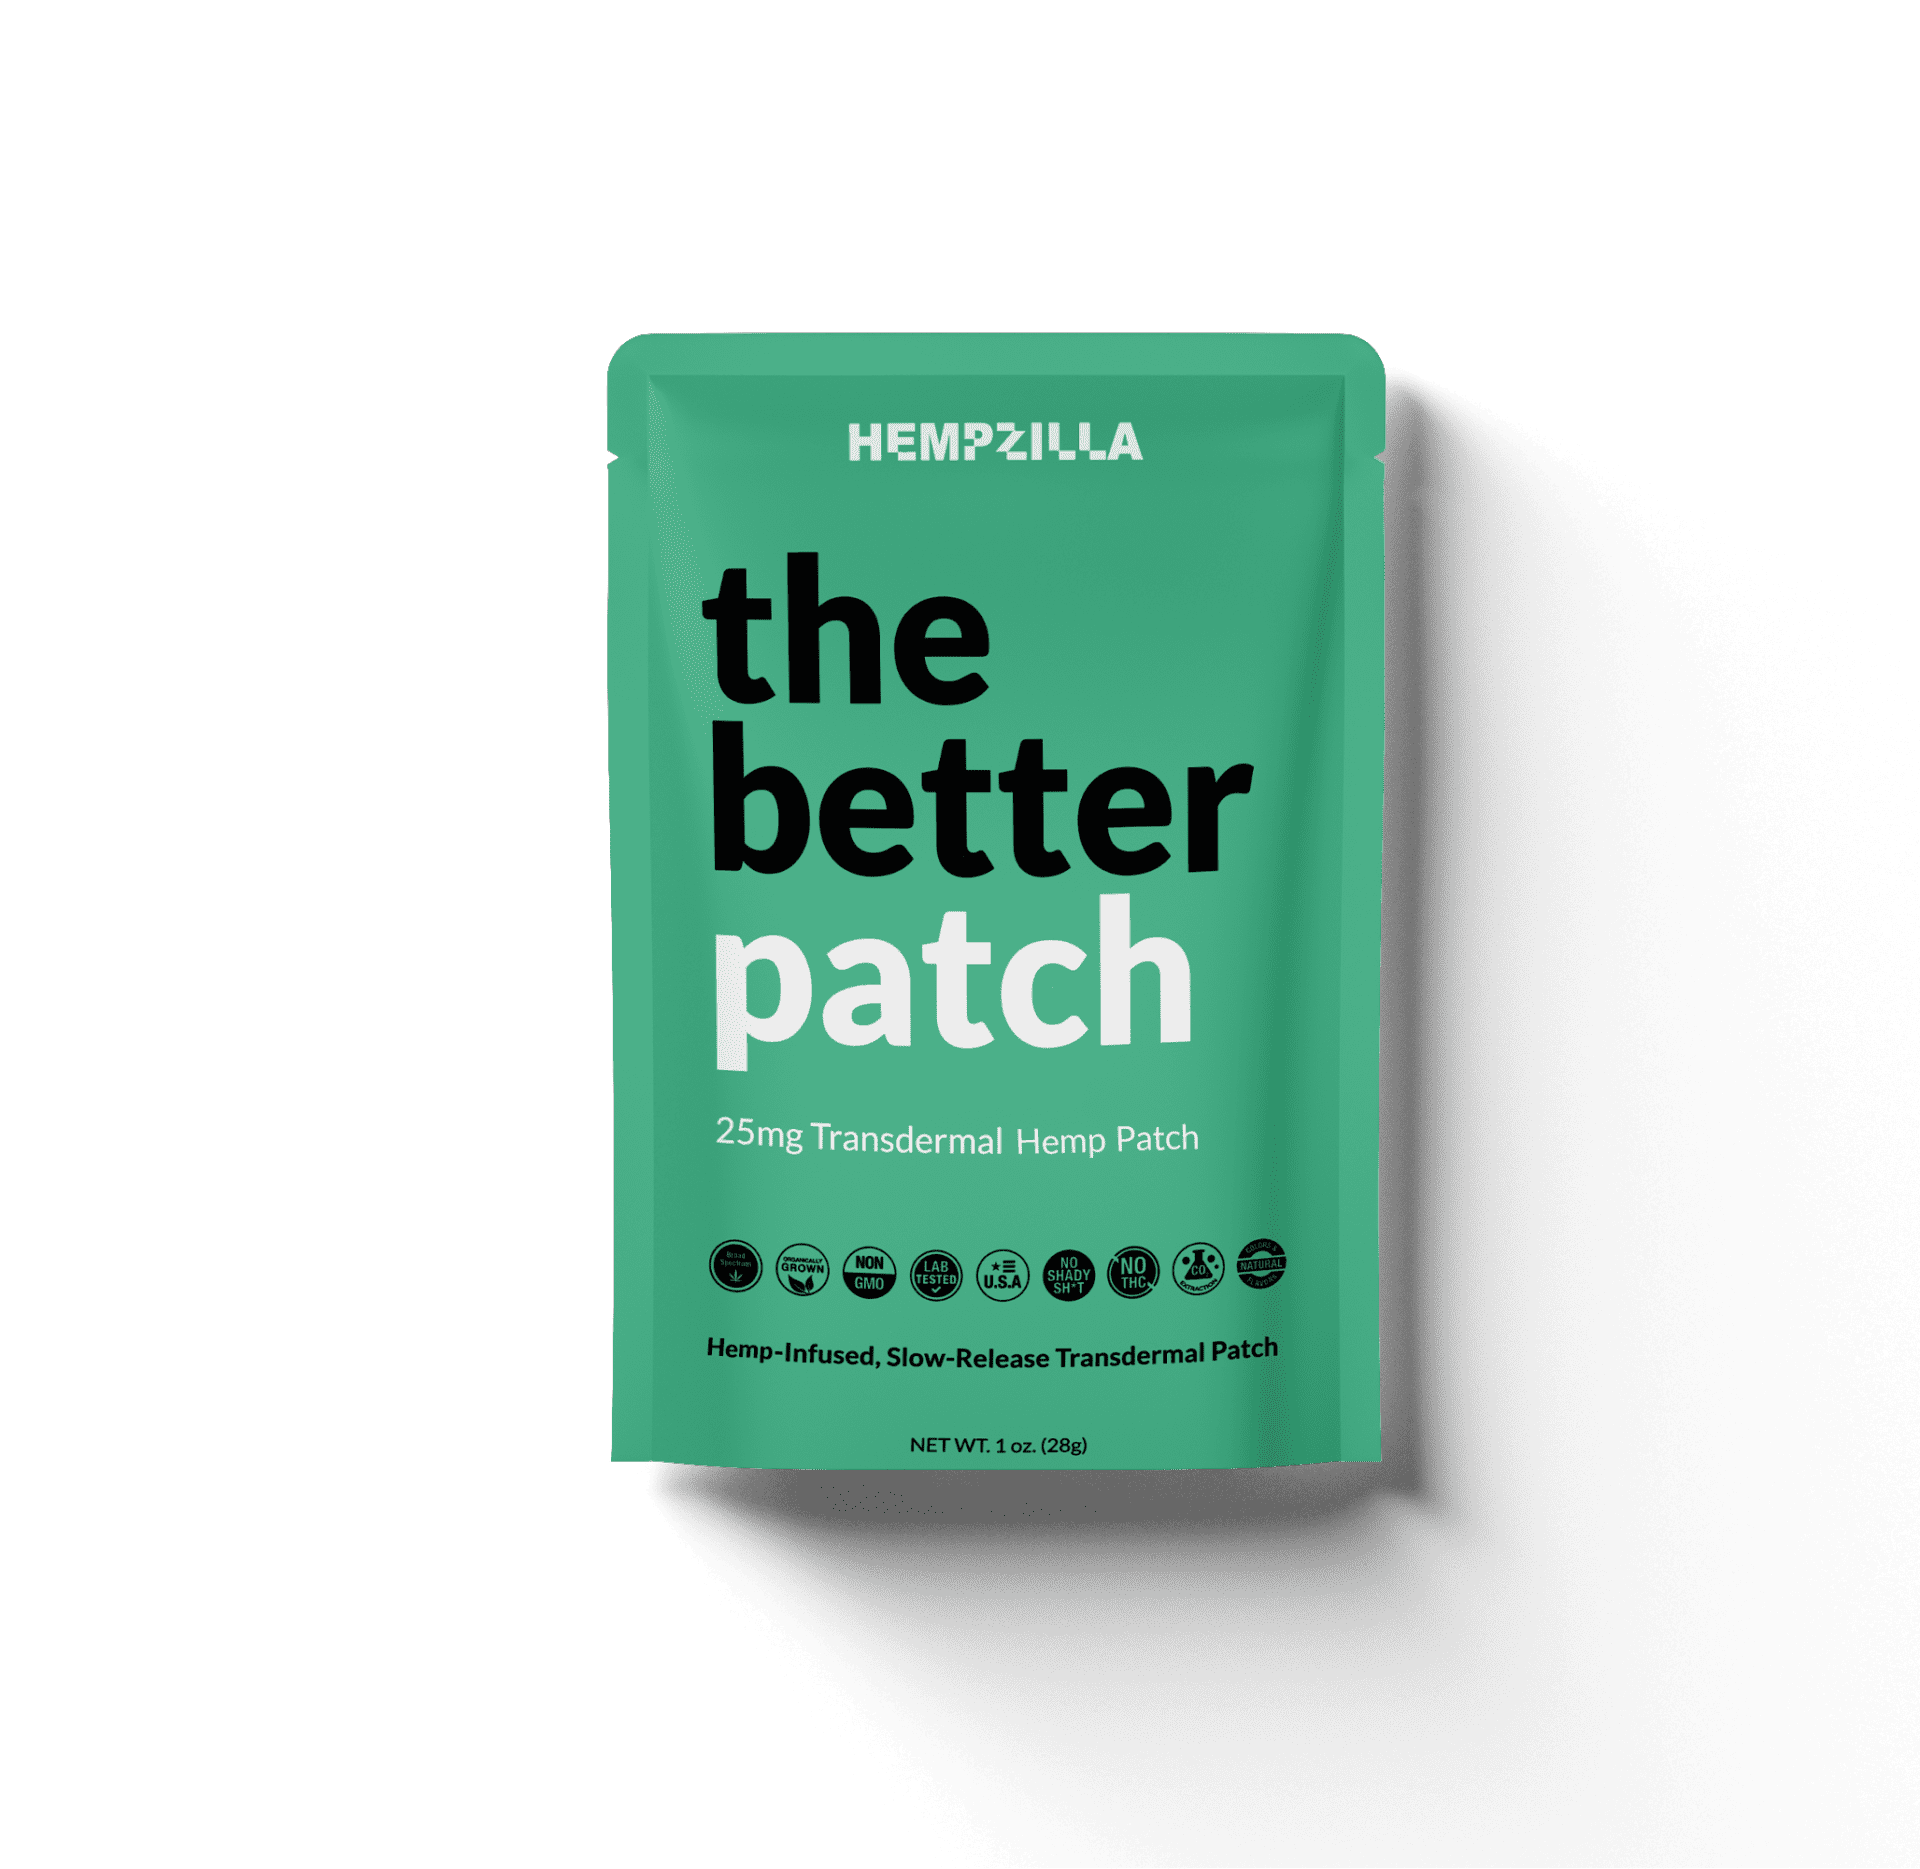 The Better Patch is a unique CBD-infused transdermal patch by Hempzilla CBD